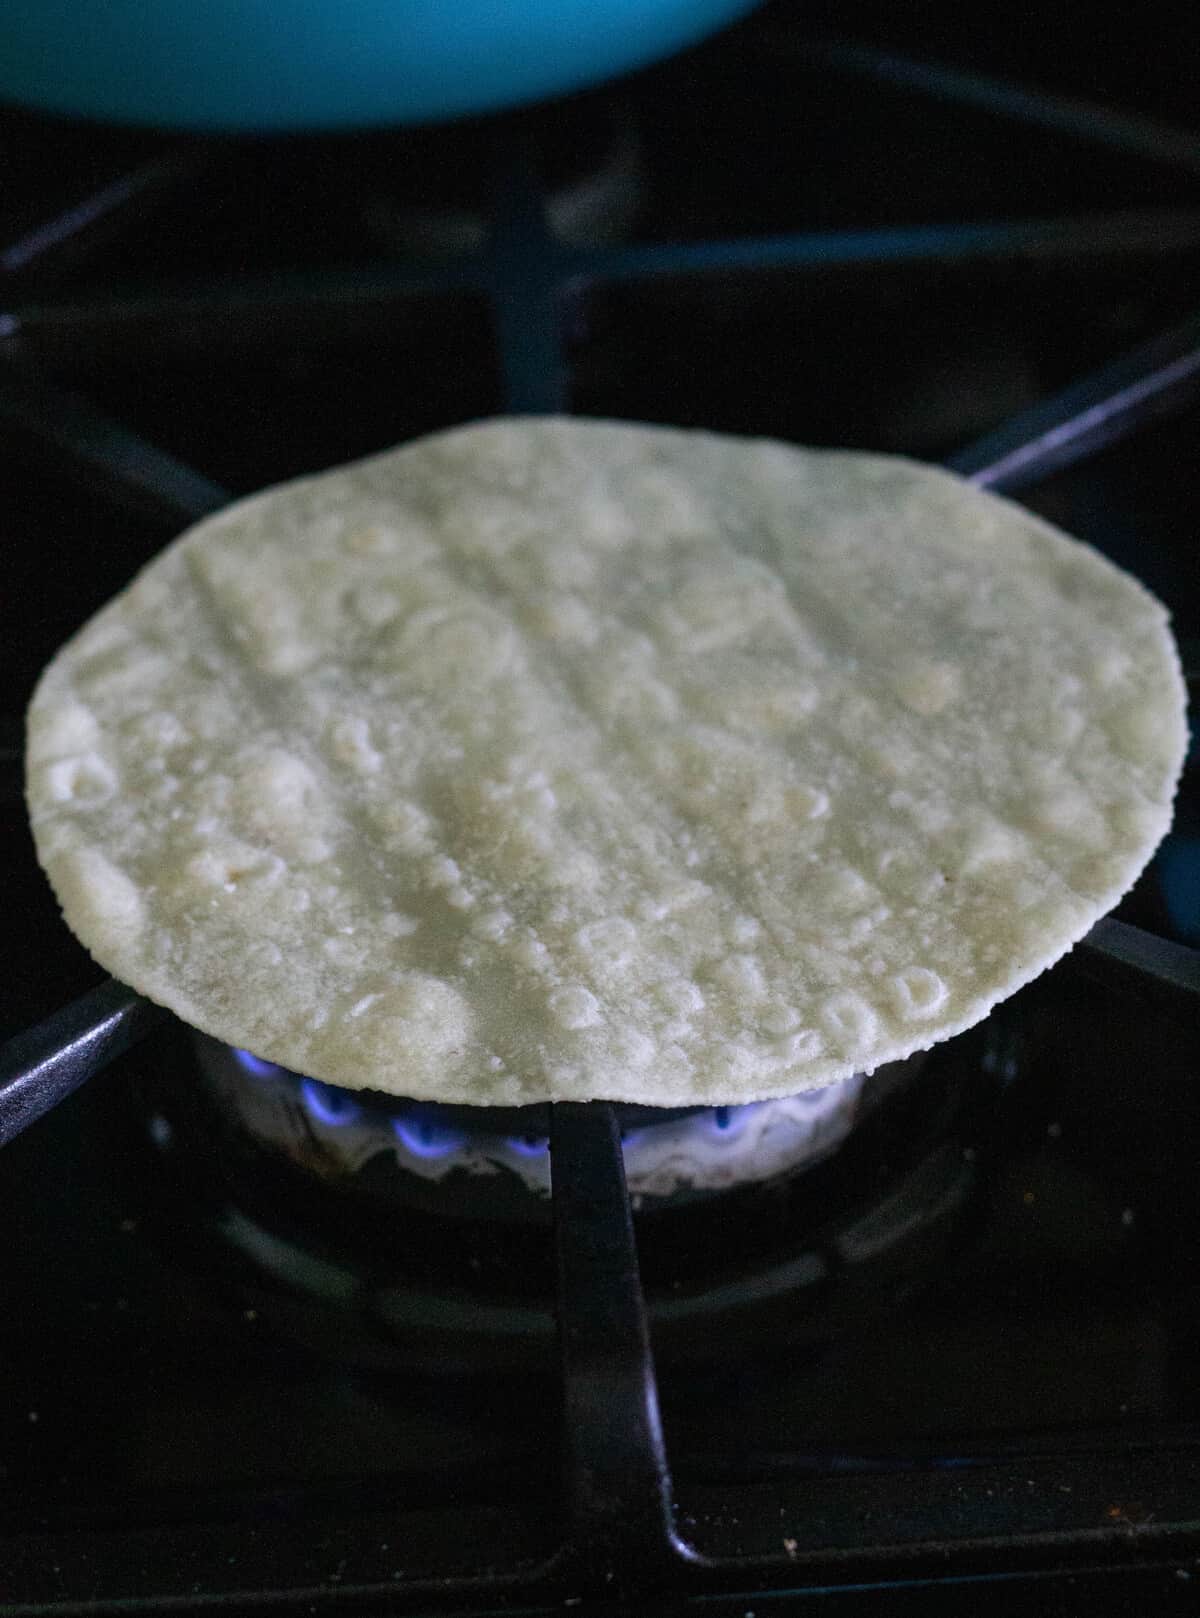 Paleo tortilla being heated on gas stove